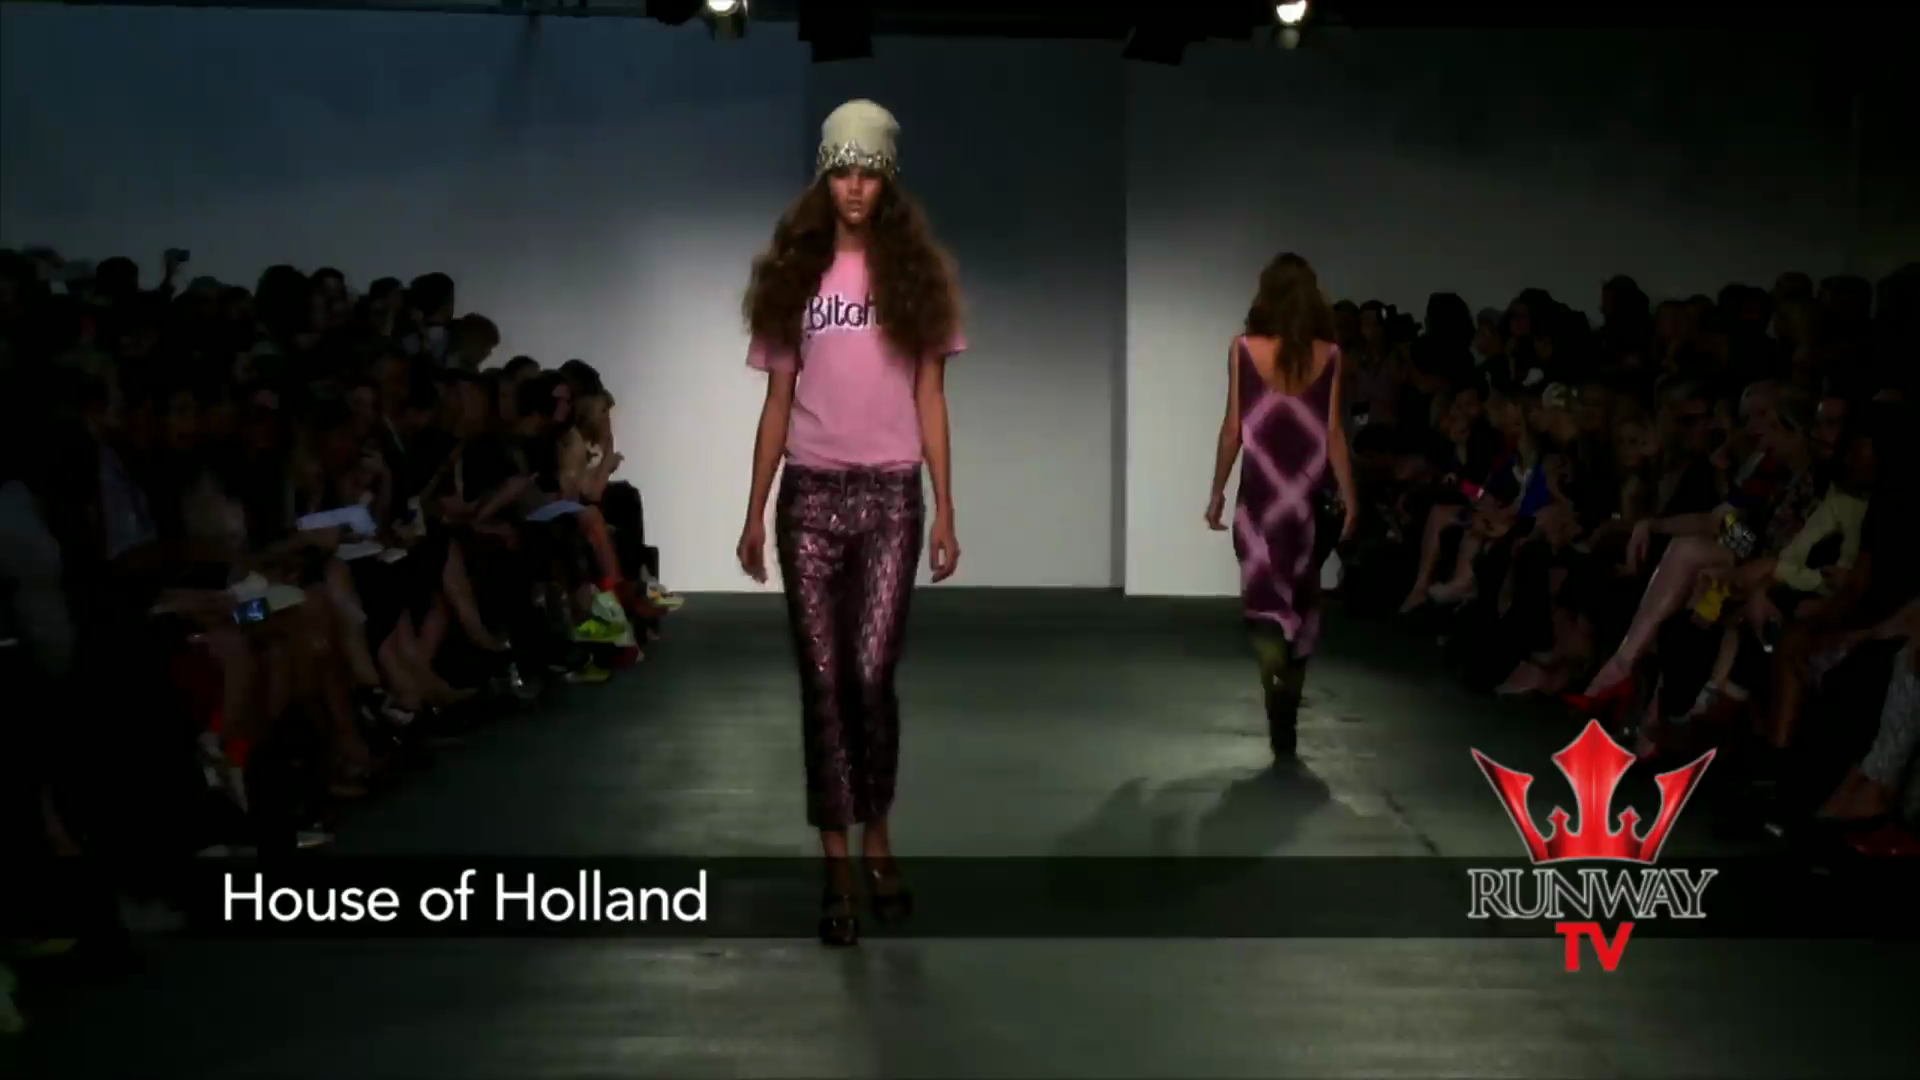 House Of Holland